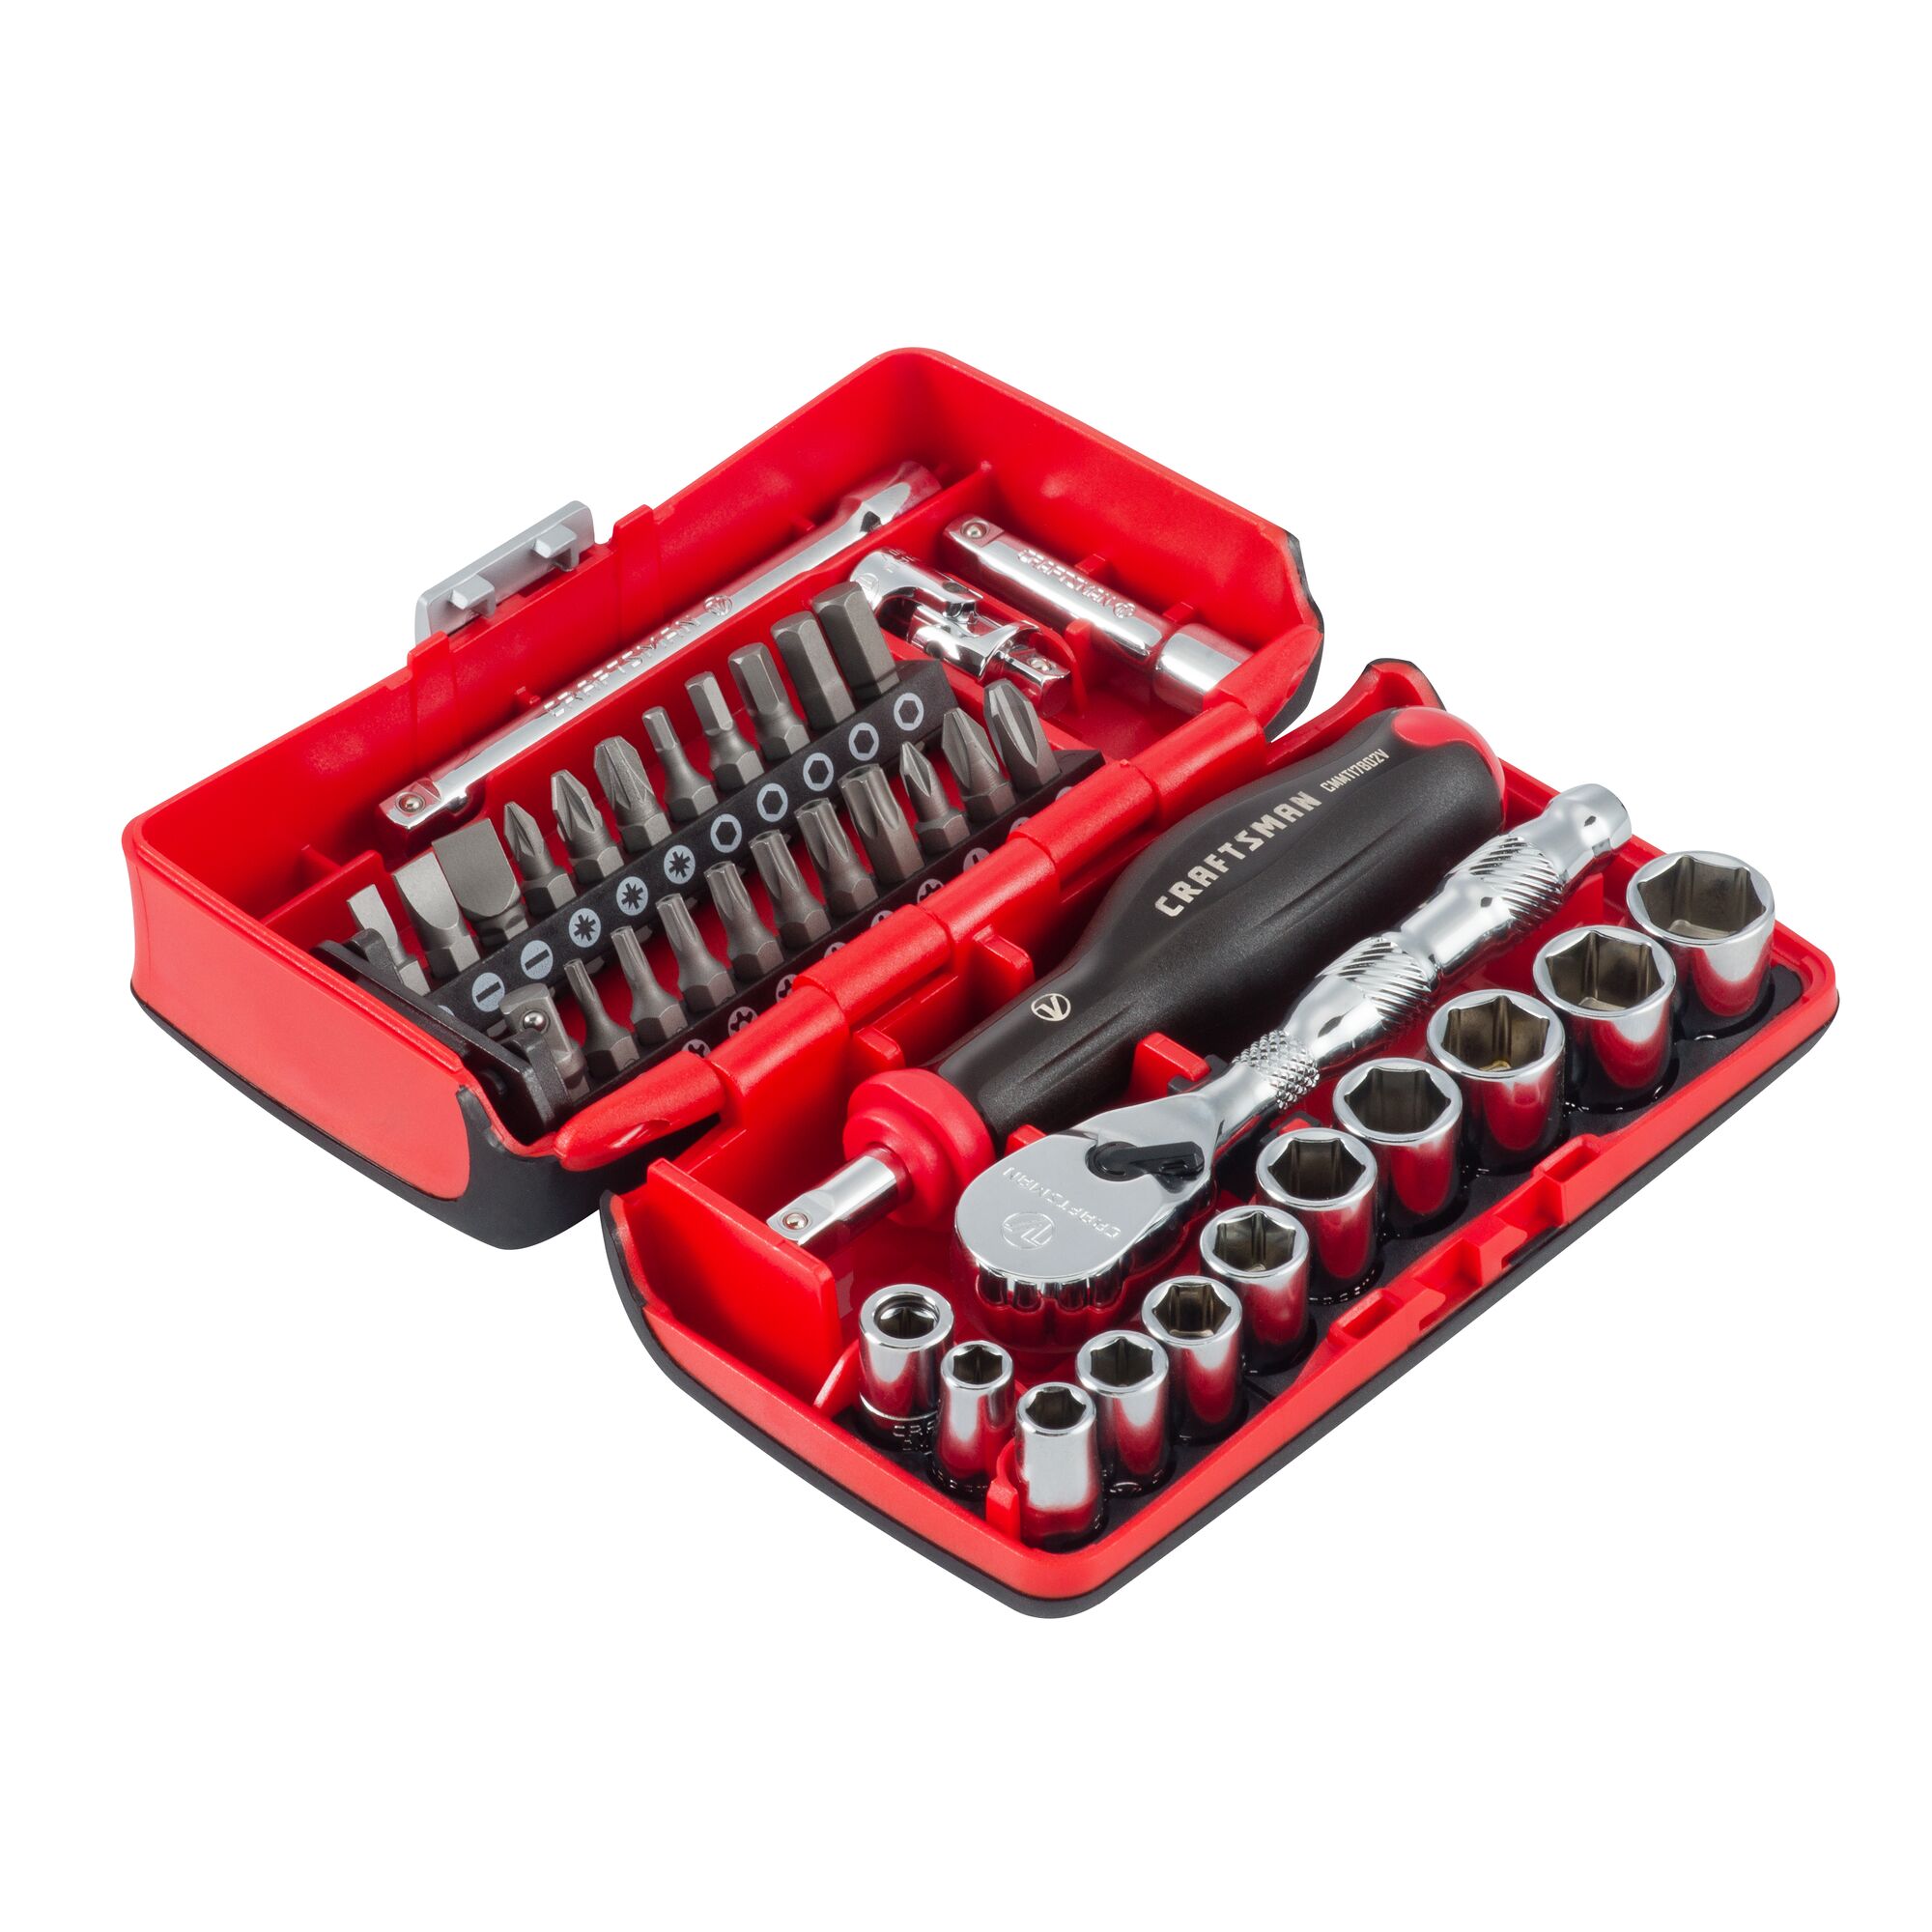 1 quarter inch drive metric 6 point tool set assembled in its case.